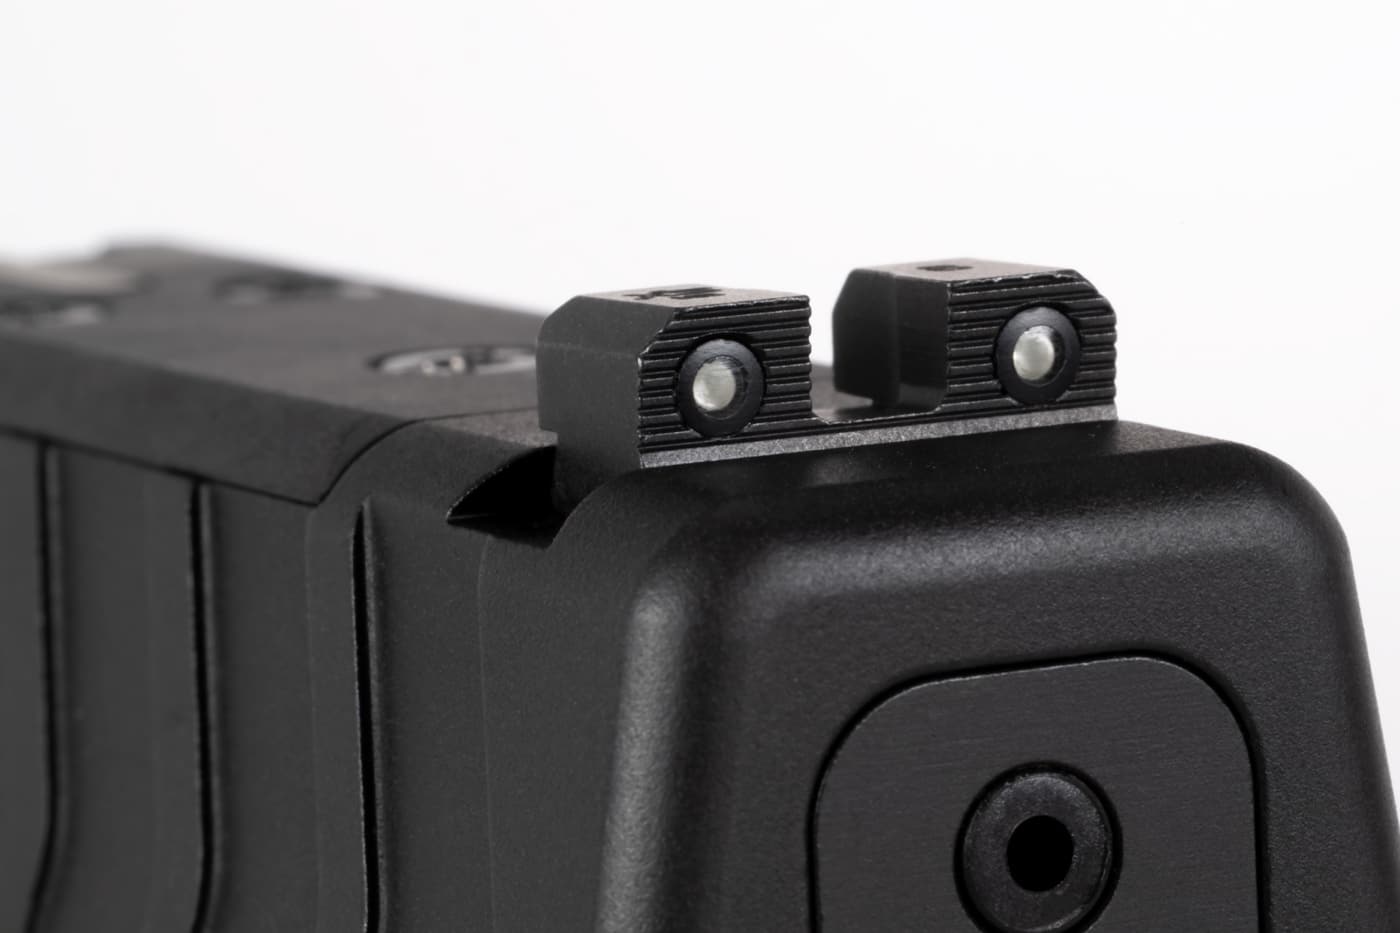 The rear sight has a pair of tritium vials that glow in the dark. The black, serrated face reduces glare in bright light. The sight also is standard height and not suppressor-height sights. For most shooters, this is perfect as few people attach a silencer to their concealed carry gun. 